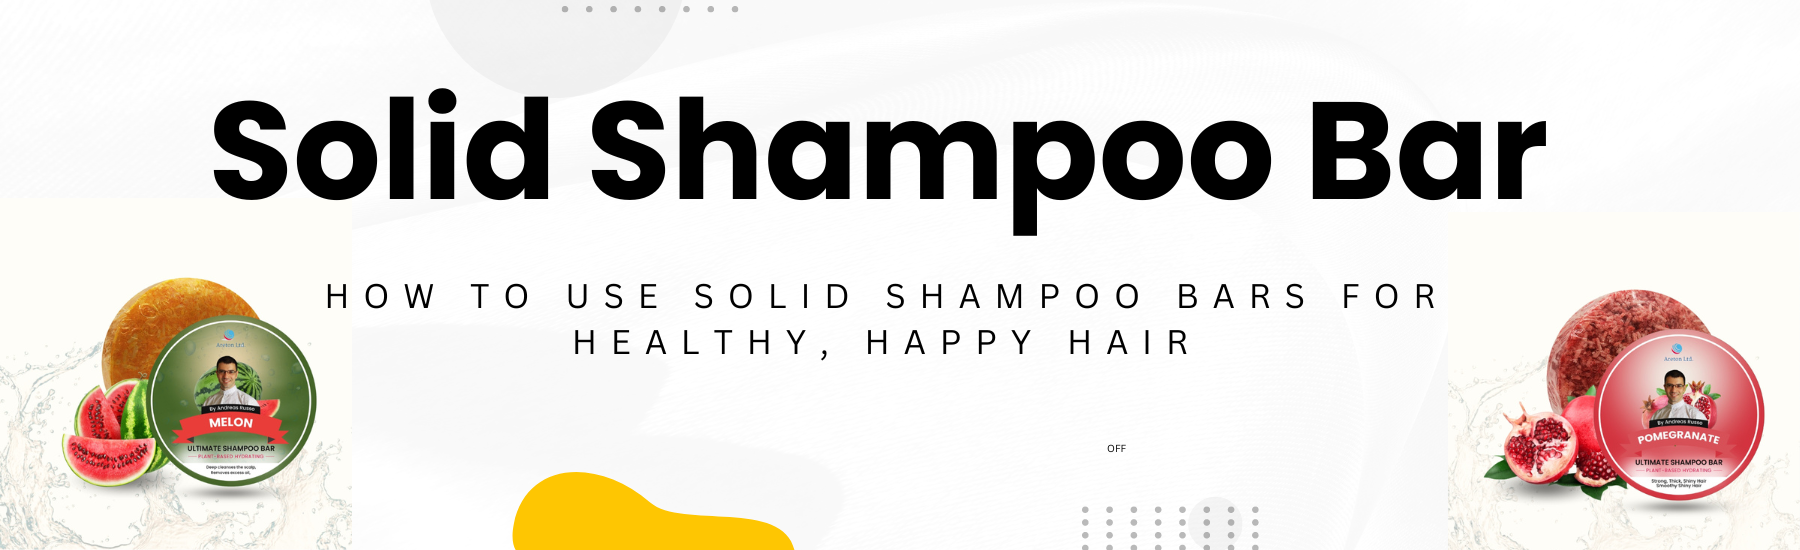 How to Use Solid Shampoo Bars for Healthy, Happy Hair